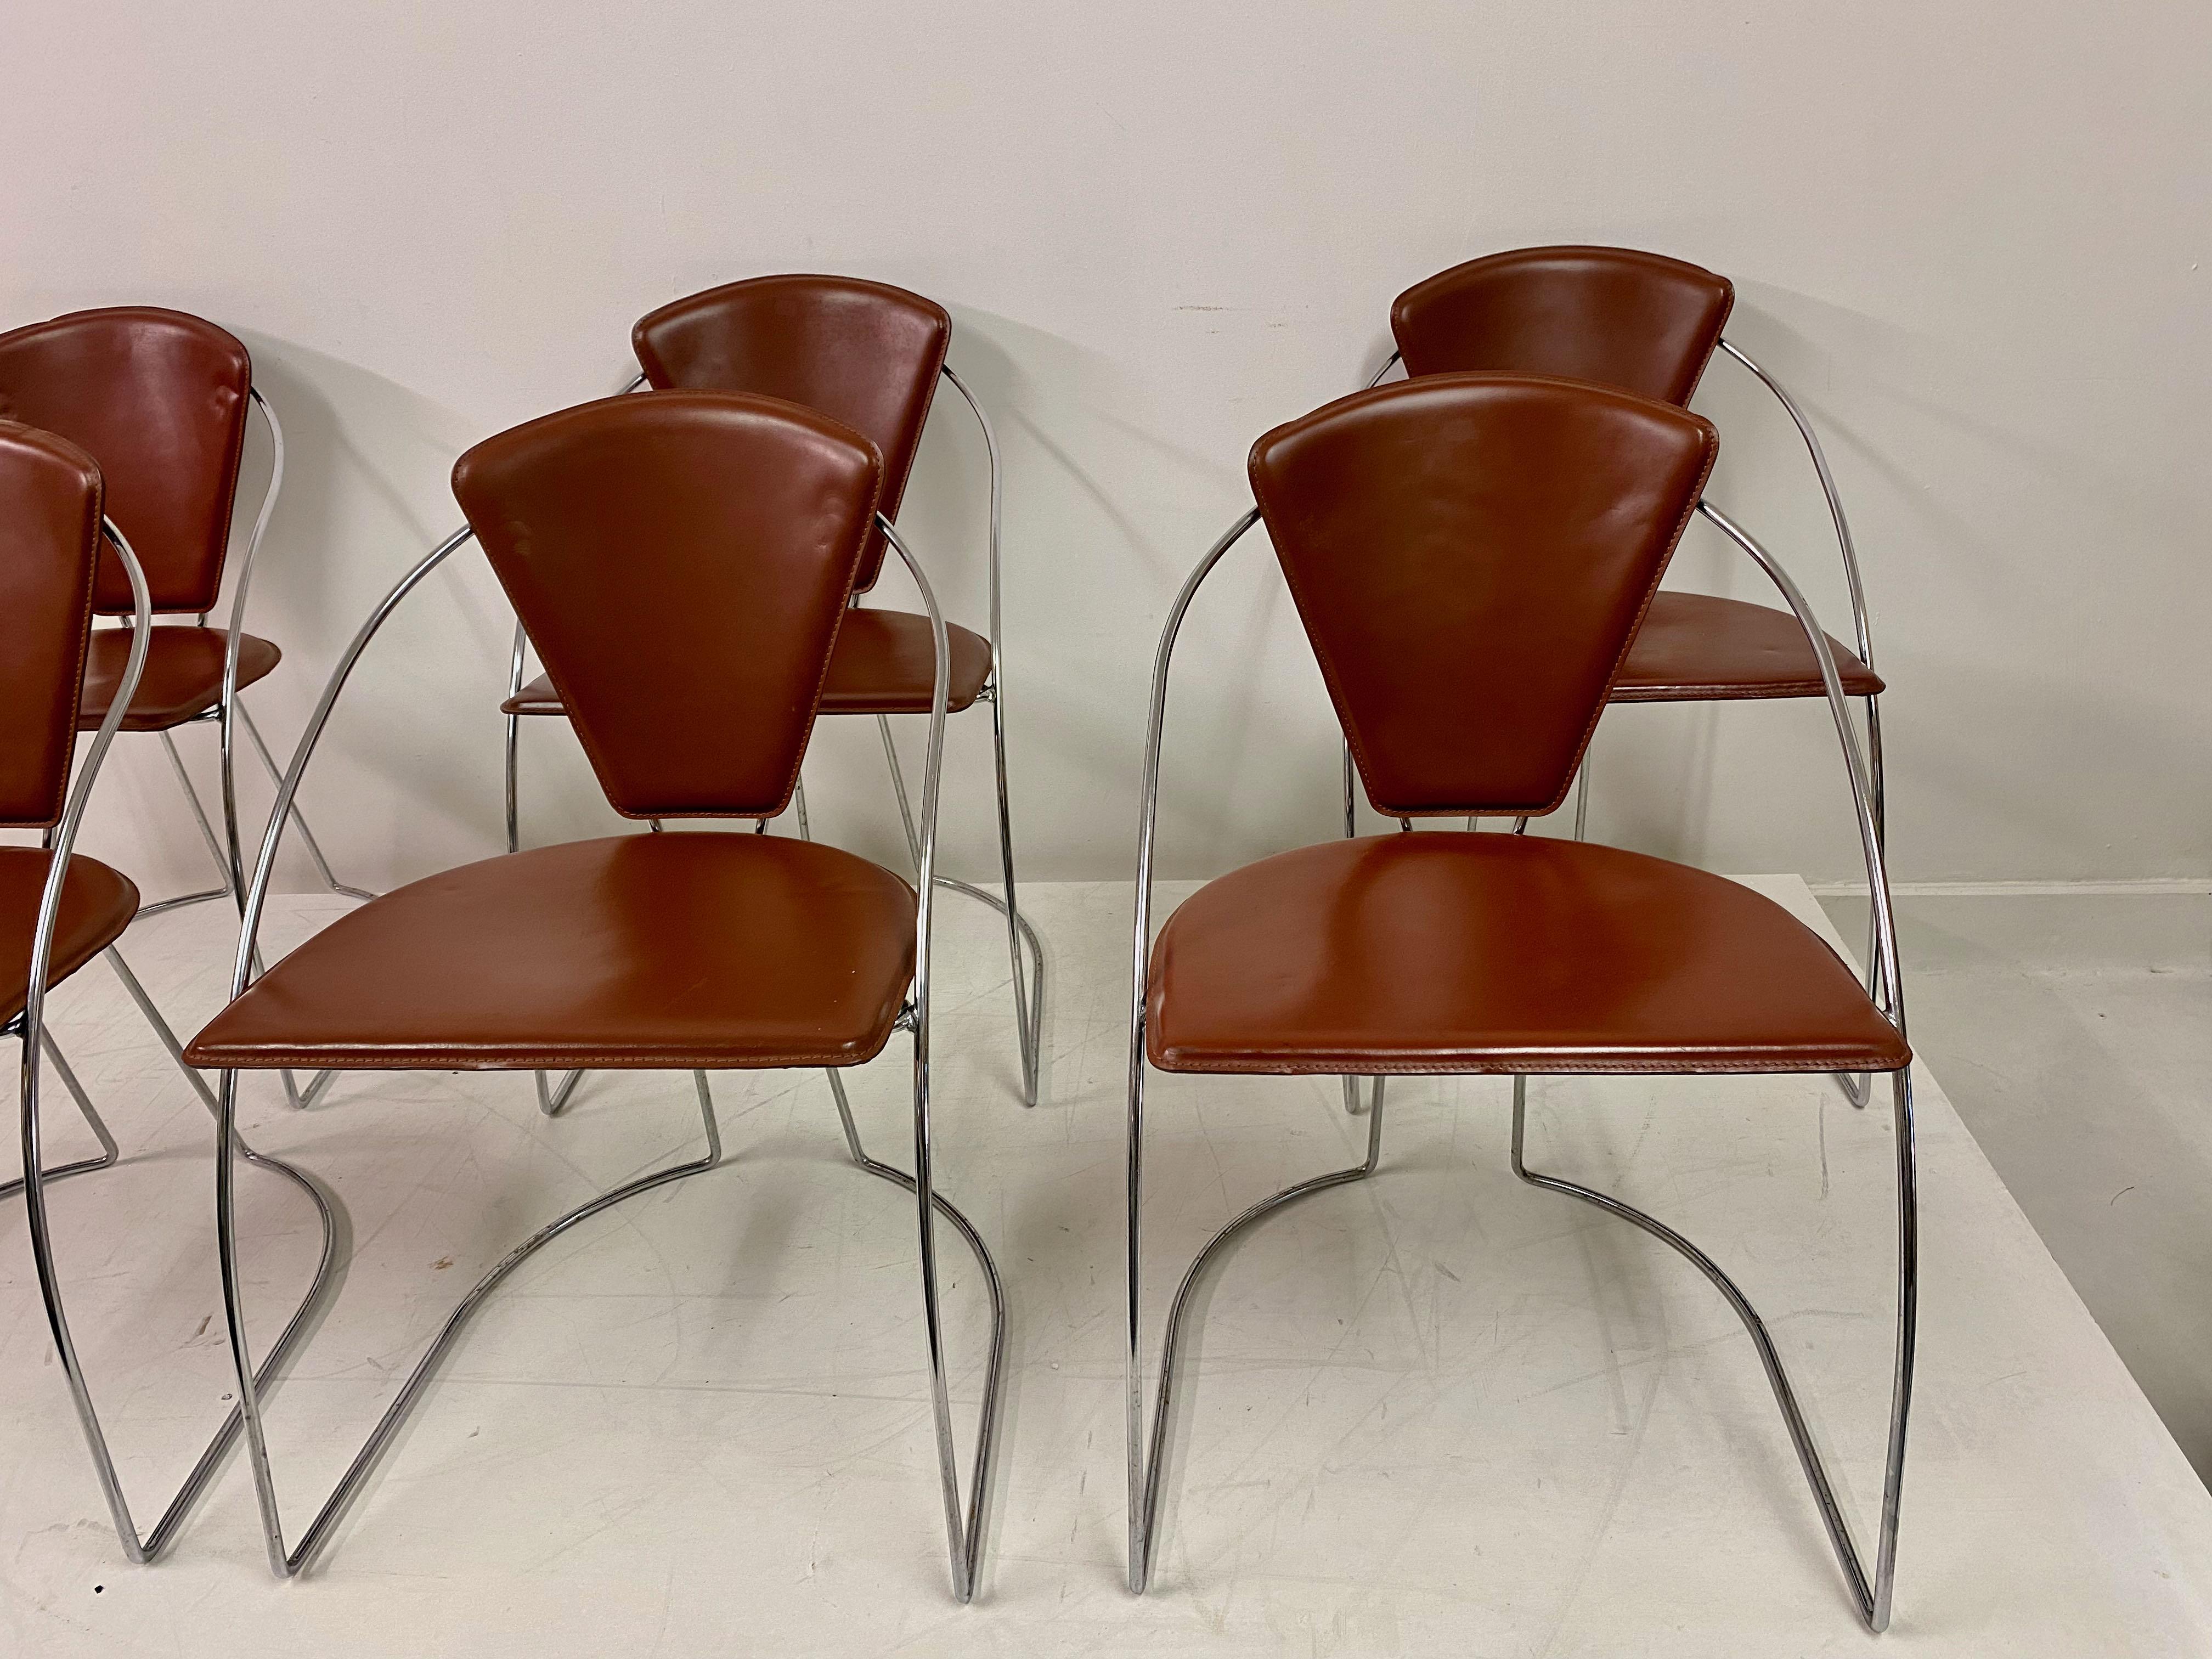 20th Century Set of Six Italian Chrome Leather Dining Chairs